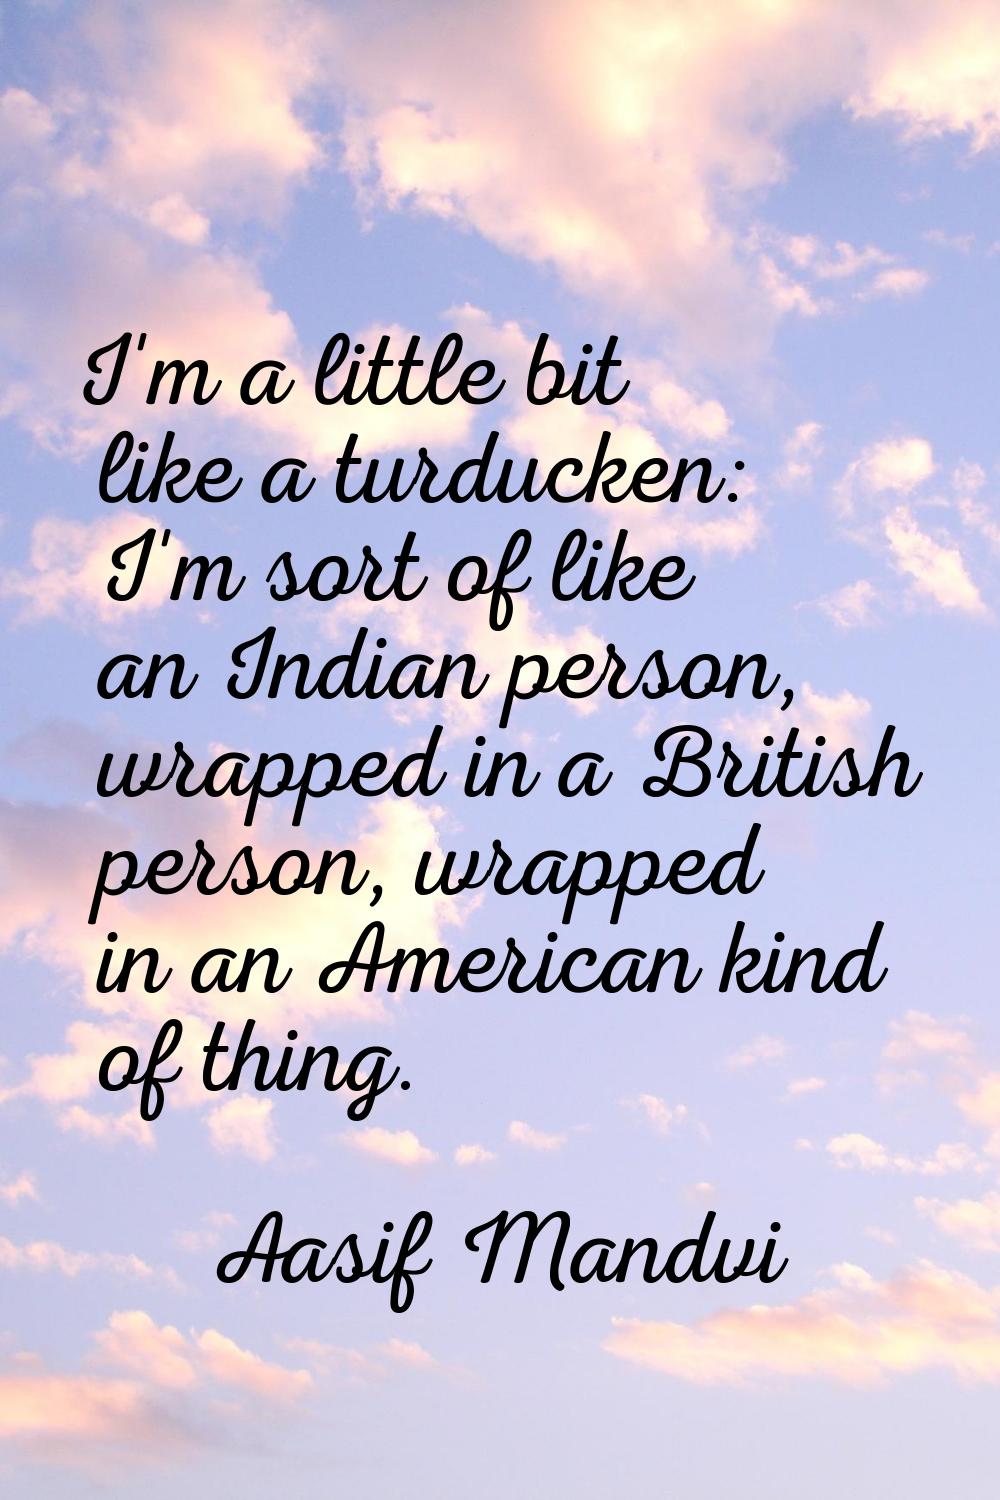 I'm a little bit like a turducken: I'm sort of like an Indian person, wrapped in a British person, 